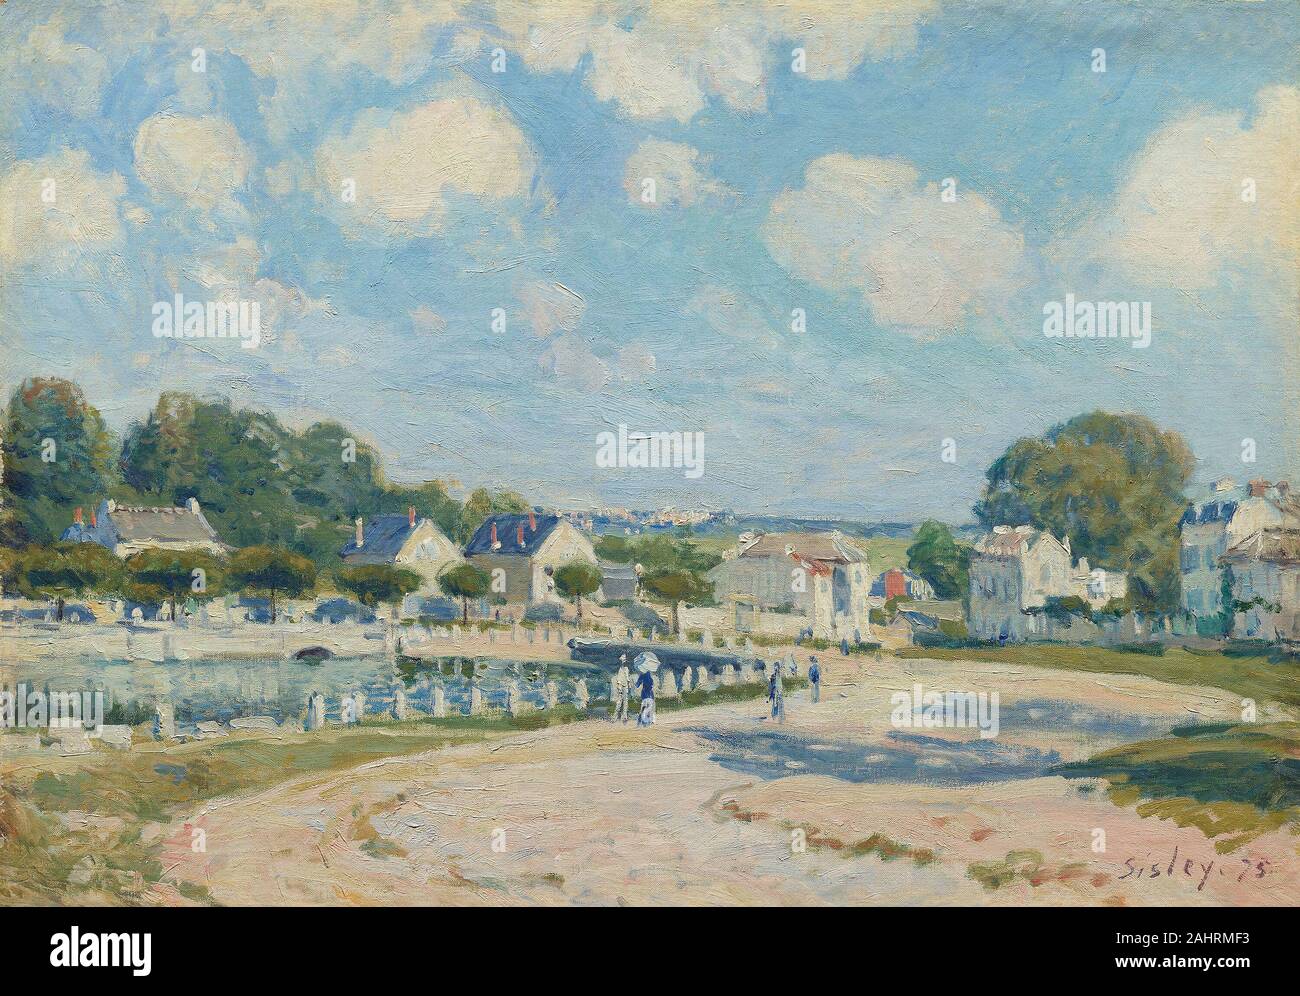 Alfred Sisley. Watering Place at Marly. 1875. France. Oil on canvas In 1875 Alfred Sisley moved to the village of Marly-le-Roi, so named because Louis XIV built an elegant country retreat there. The artist lived on the rue de l’Abreuvoir, which flanked the pool featured on the left of this canvas. The pool was all that remained of the water gardens that had been part of the king’s park. Of the original Impressionist group, Sisley remained most faithful to his early landscape subjects, spending most of his life painting in the villages along the Seine River, in the region referred to as the cra Stock Photo